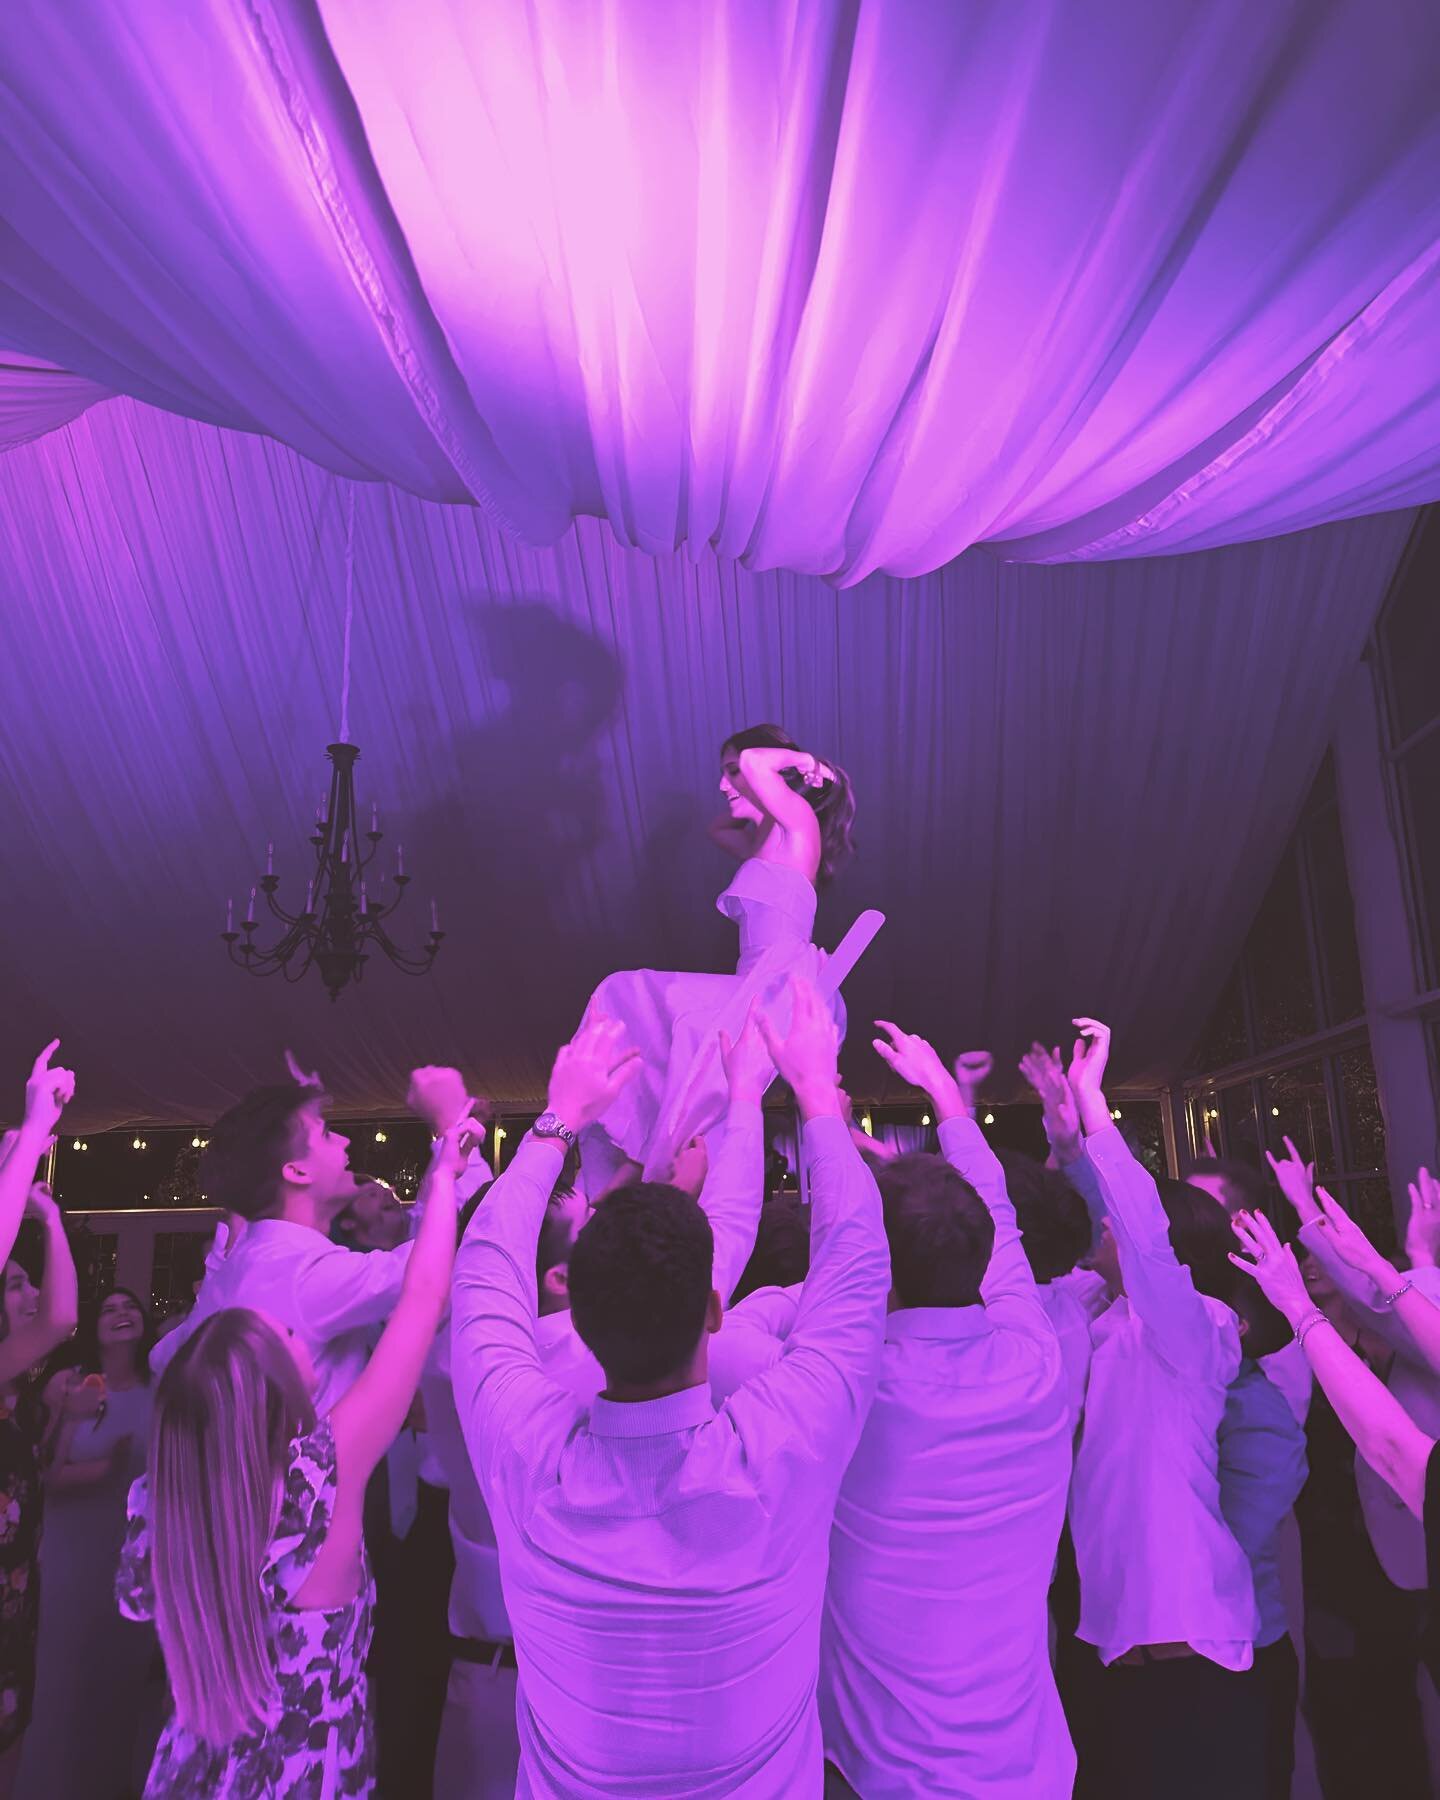 Believe it or not this is certainly not the first time at my events the Bride or the Groom ended up on the crowd. #weddingdj #dj #indianpolisdj #djlife #events #wedding #weddingvendor #weddingseason #engagedindy #indianadj #midwestdj #clubdj